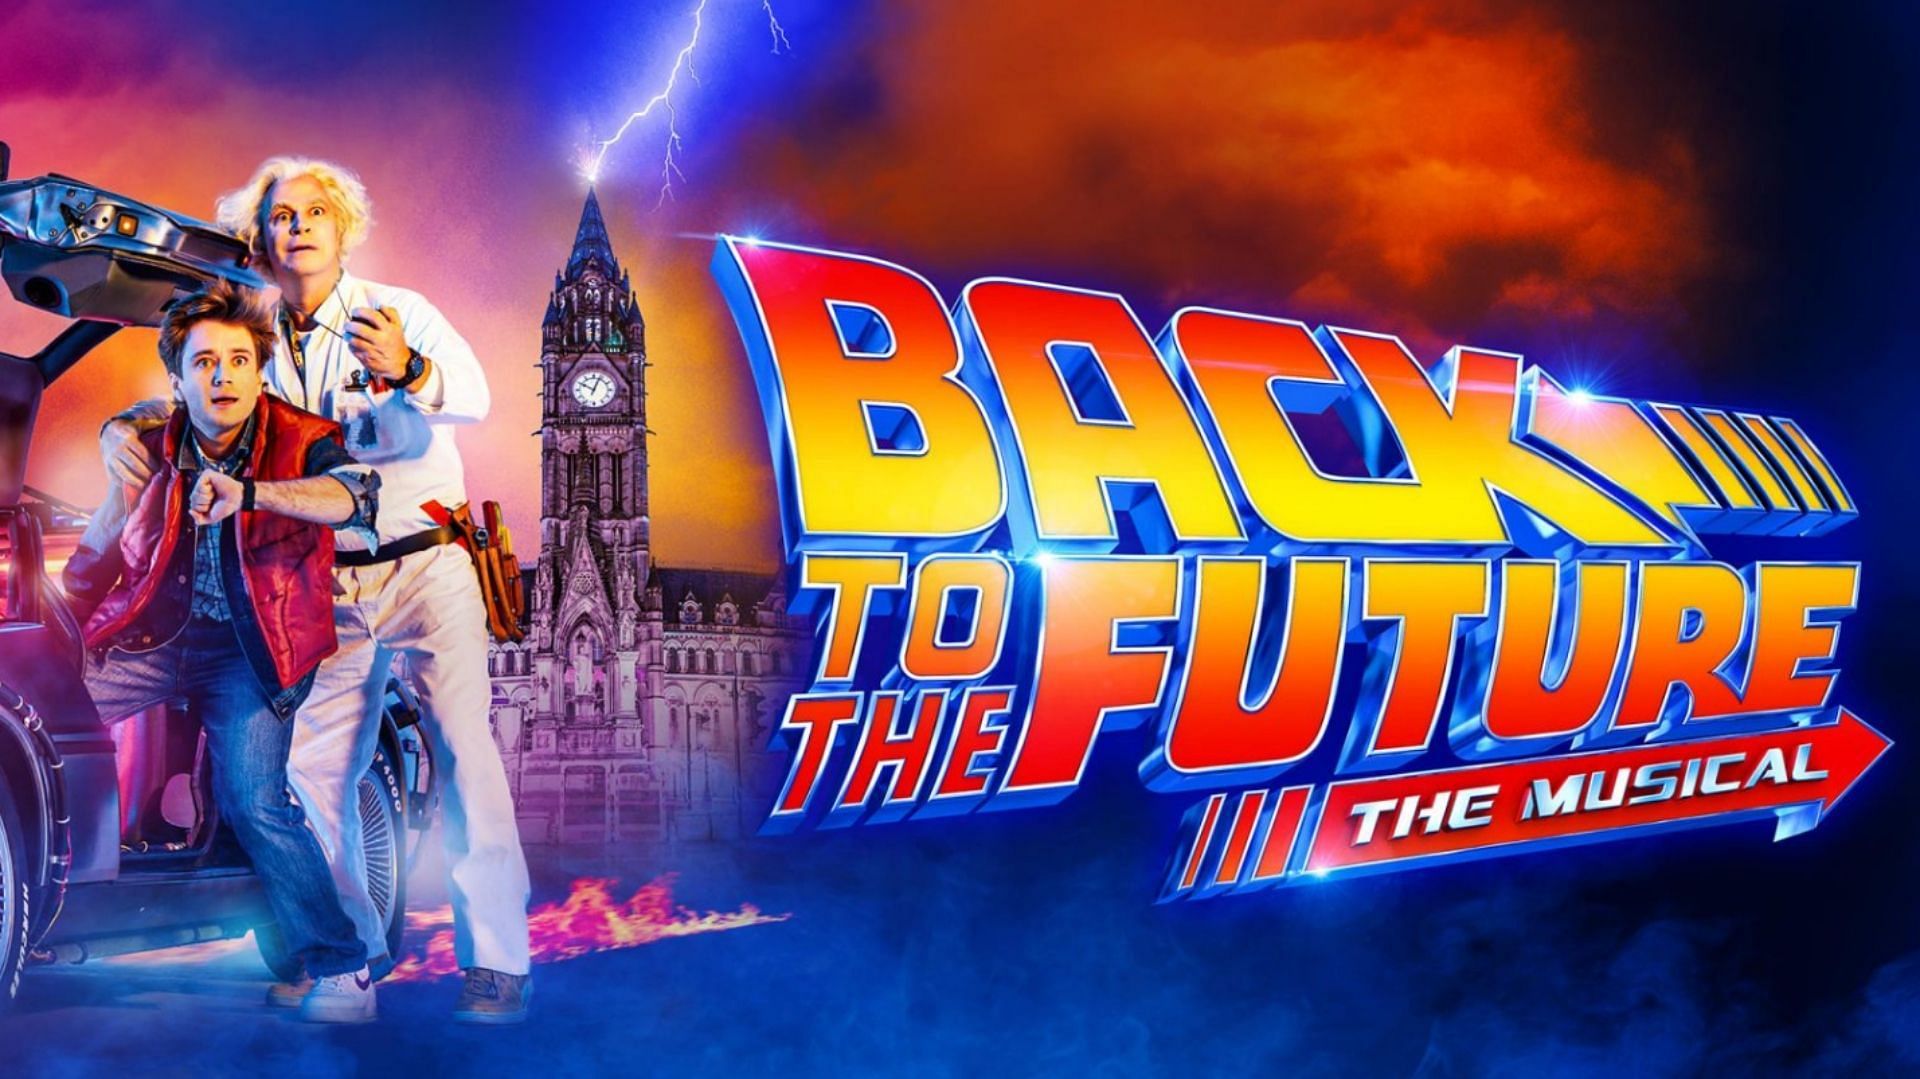 Back to the Future The Musical on Broadway 2023 Tickets, where to buy